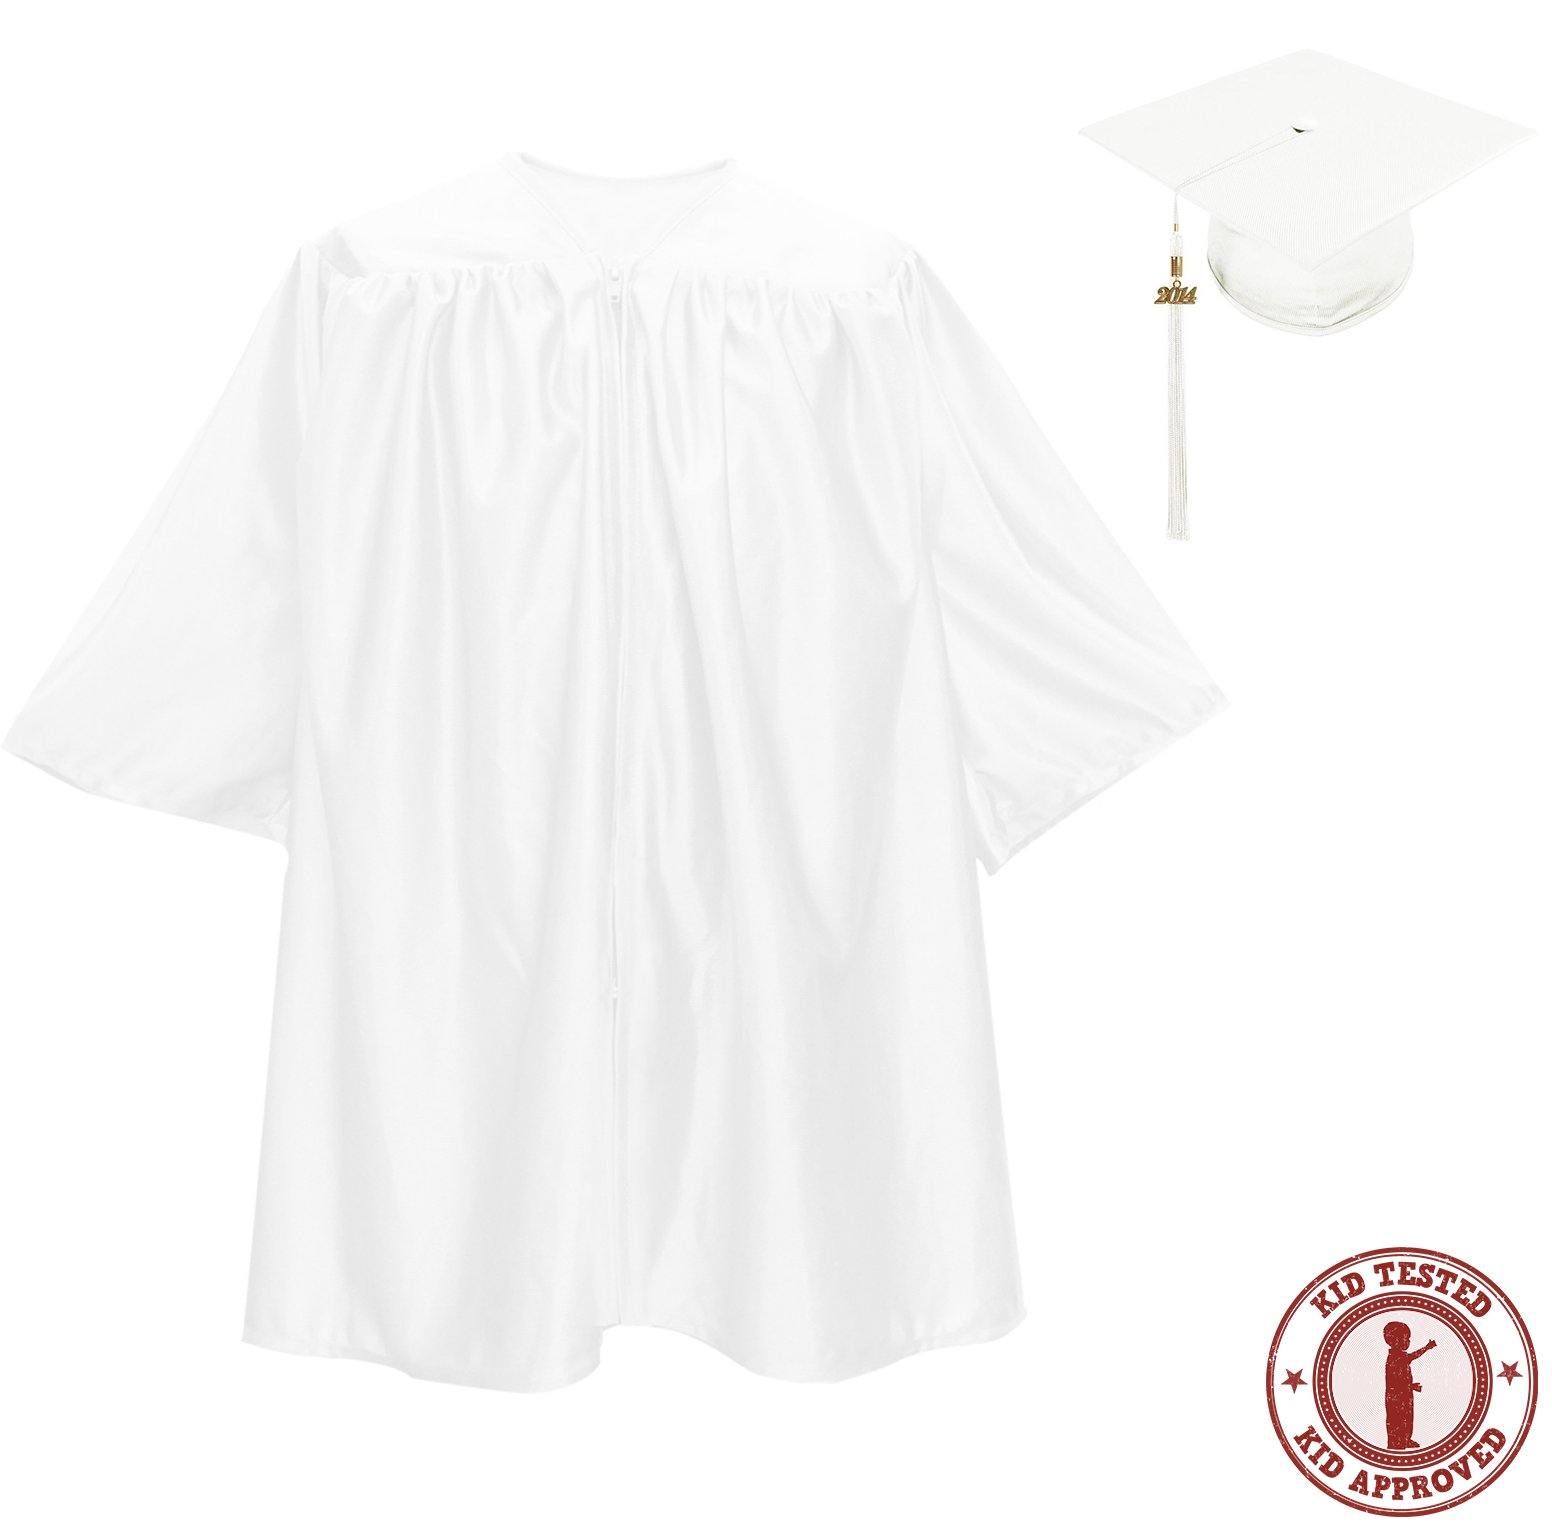 White Cap And Gown